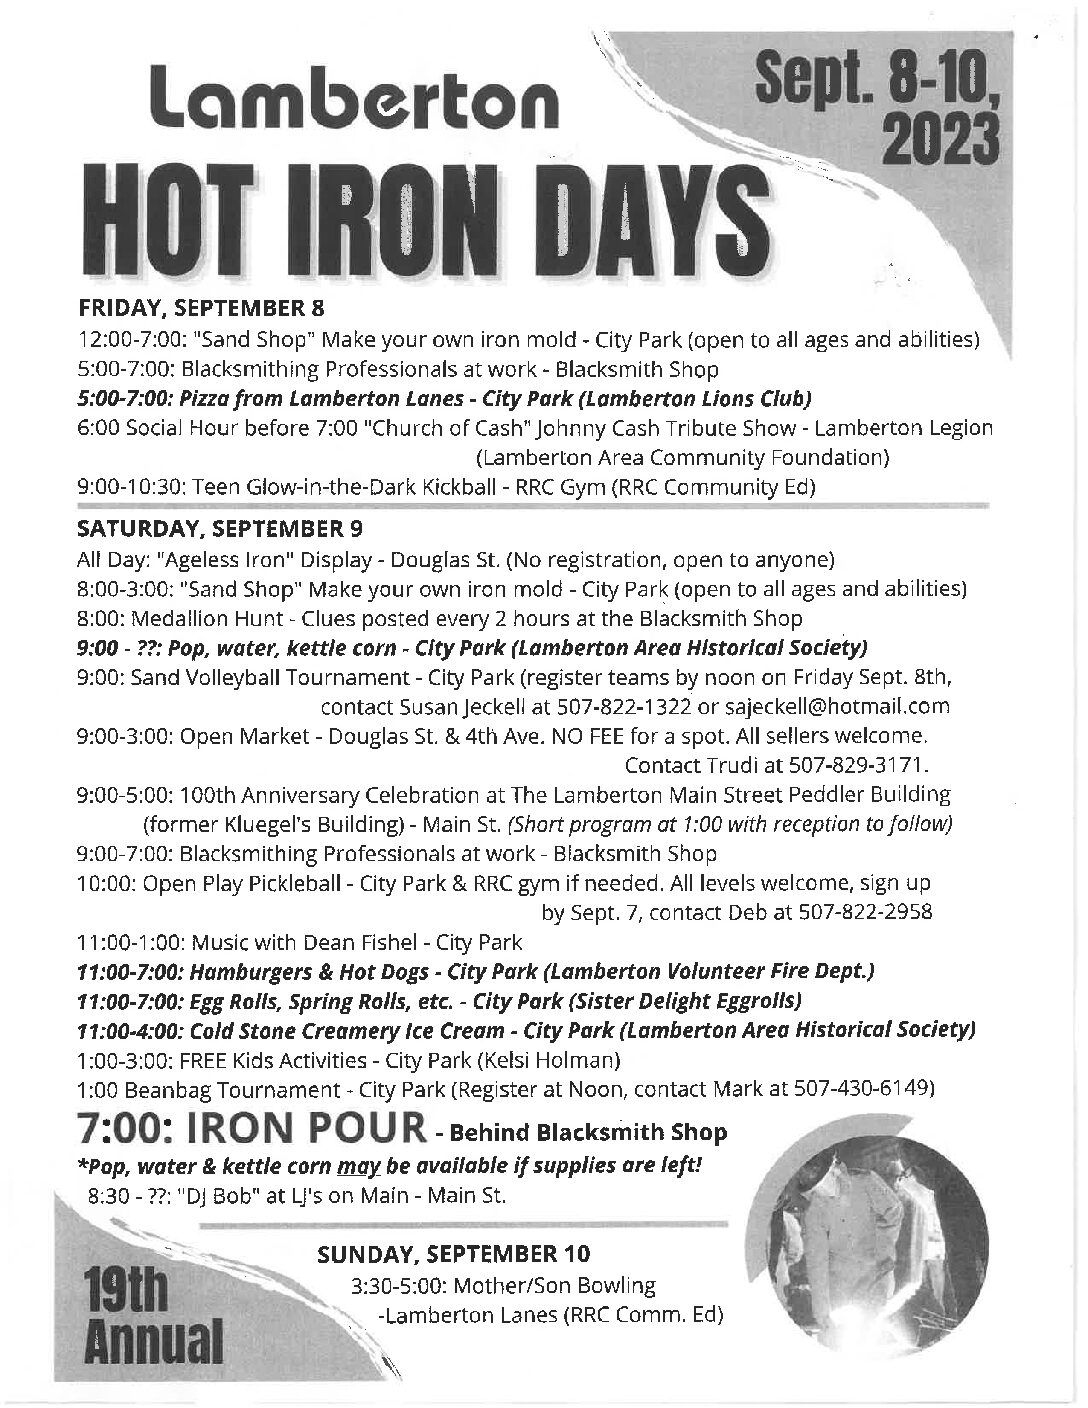 <h1 class="tribe-events-single-event-title">Hot Iron Days in Lamberton</h1>